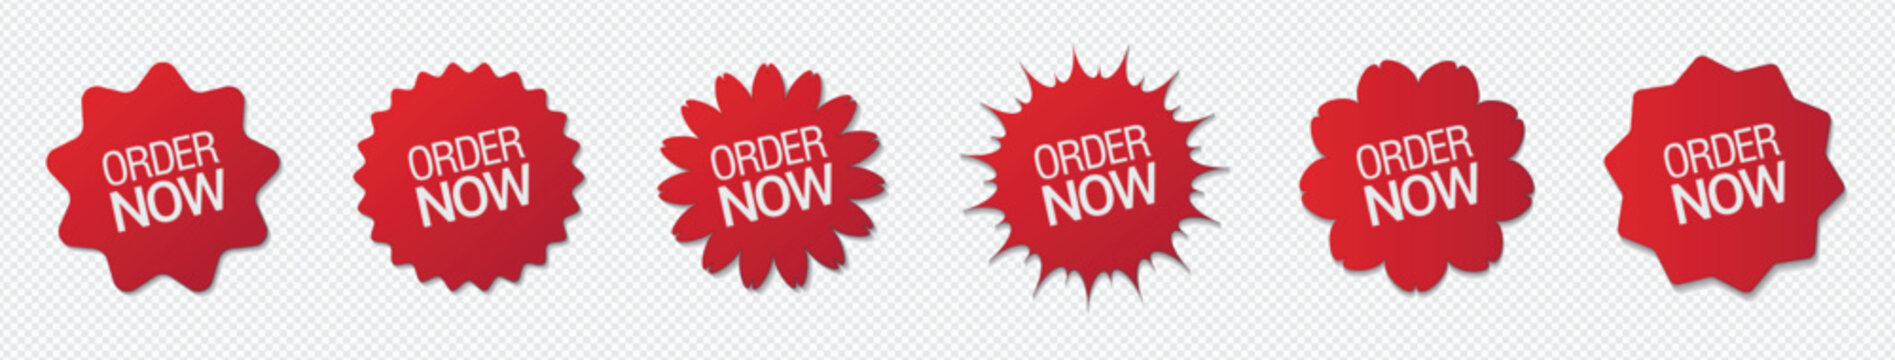 Red "Order Now" tag, versatile vector icon, sticker, and deal label for enticing promotions. Ideal for e-commerce and marketing.